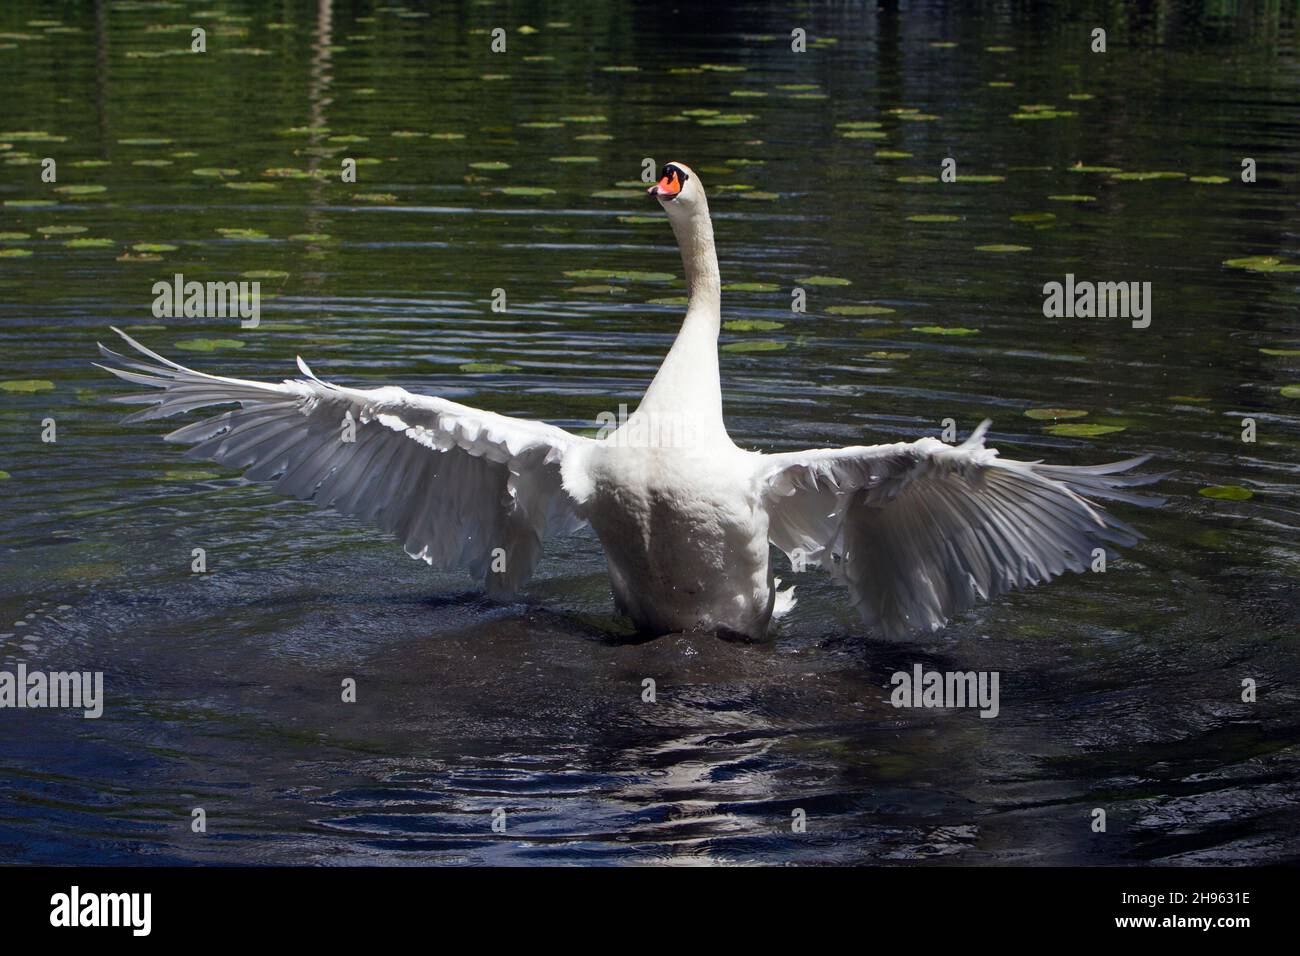 Mute Swan (Cygnus olor), in lake, rearing out of water, flapping its wings, imposing, Lower Saxony, Germany Stock Photo